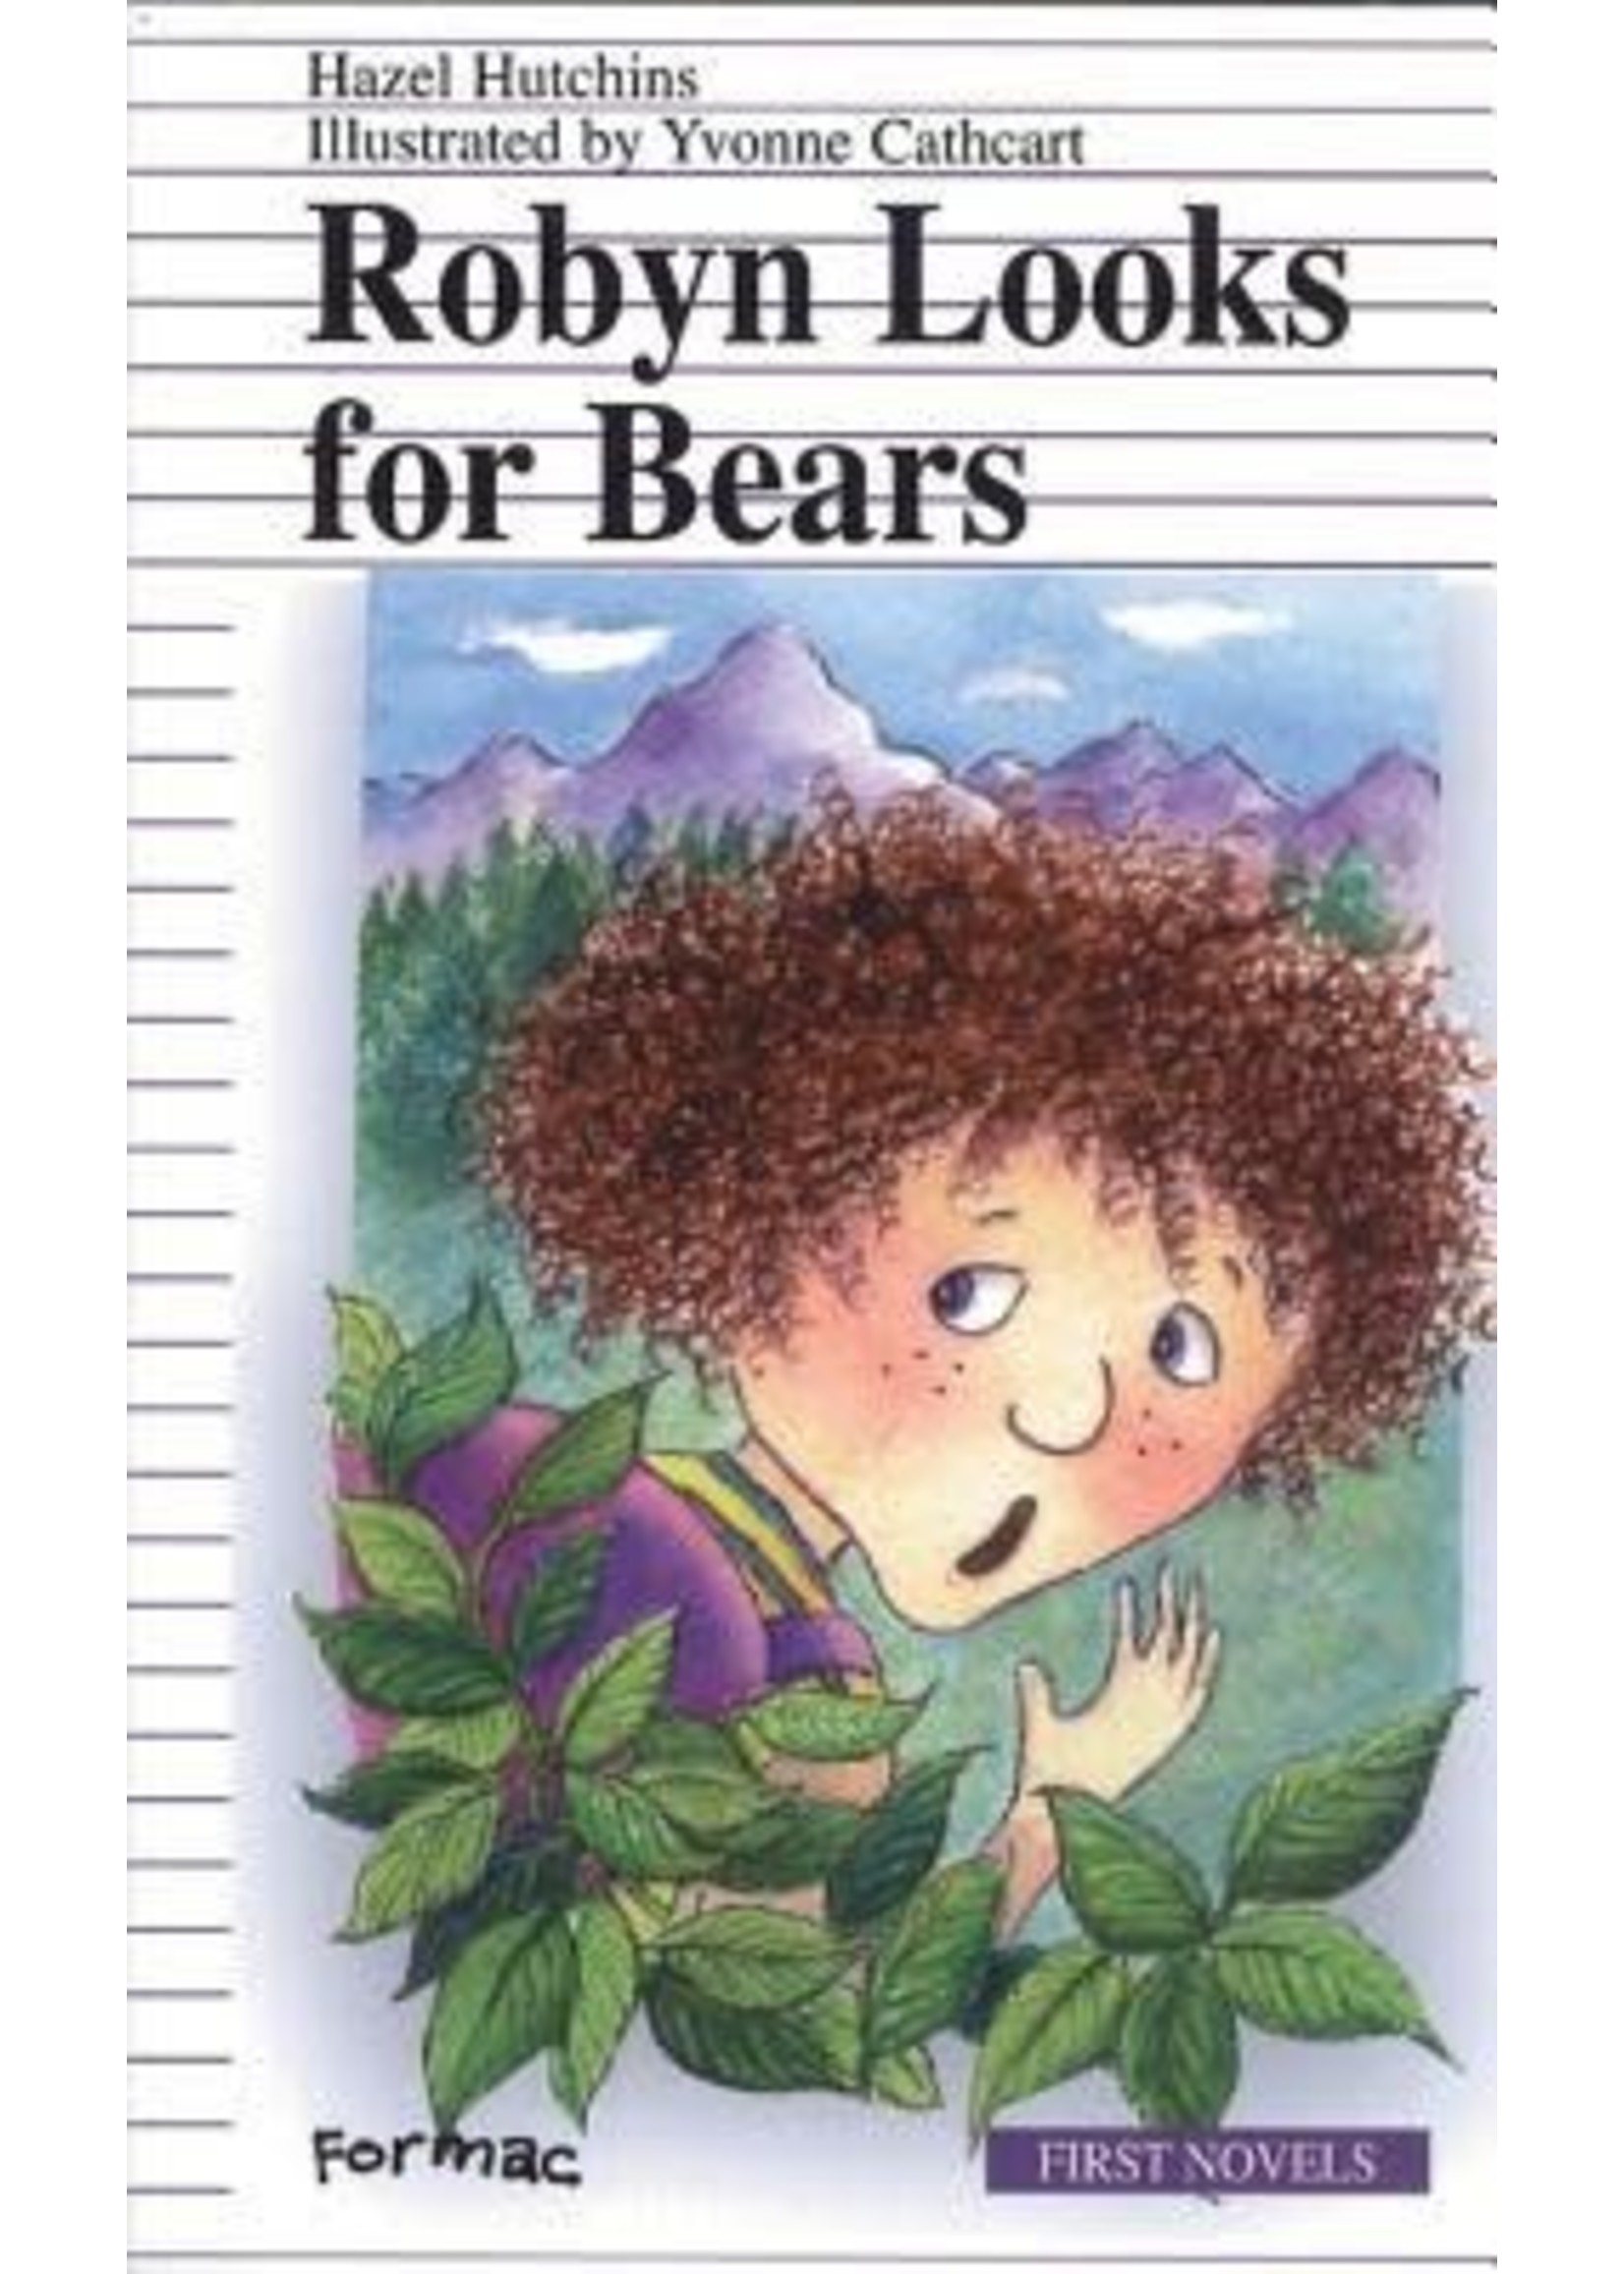 Robyn Looks for Bears by Hazel Hutchins, Yvonne Cathcart